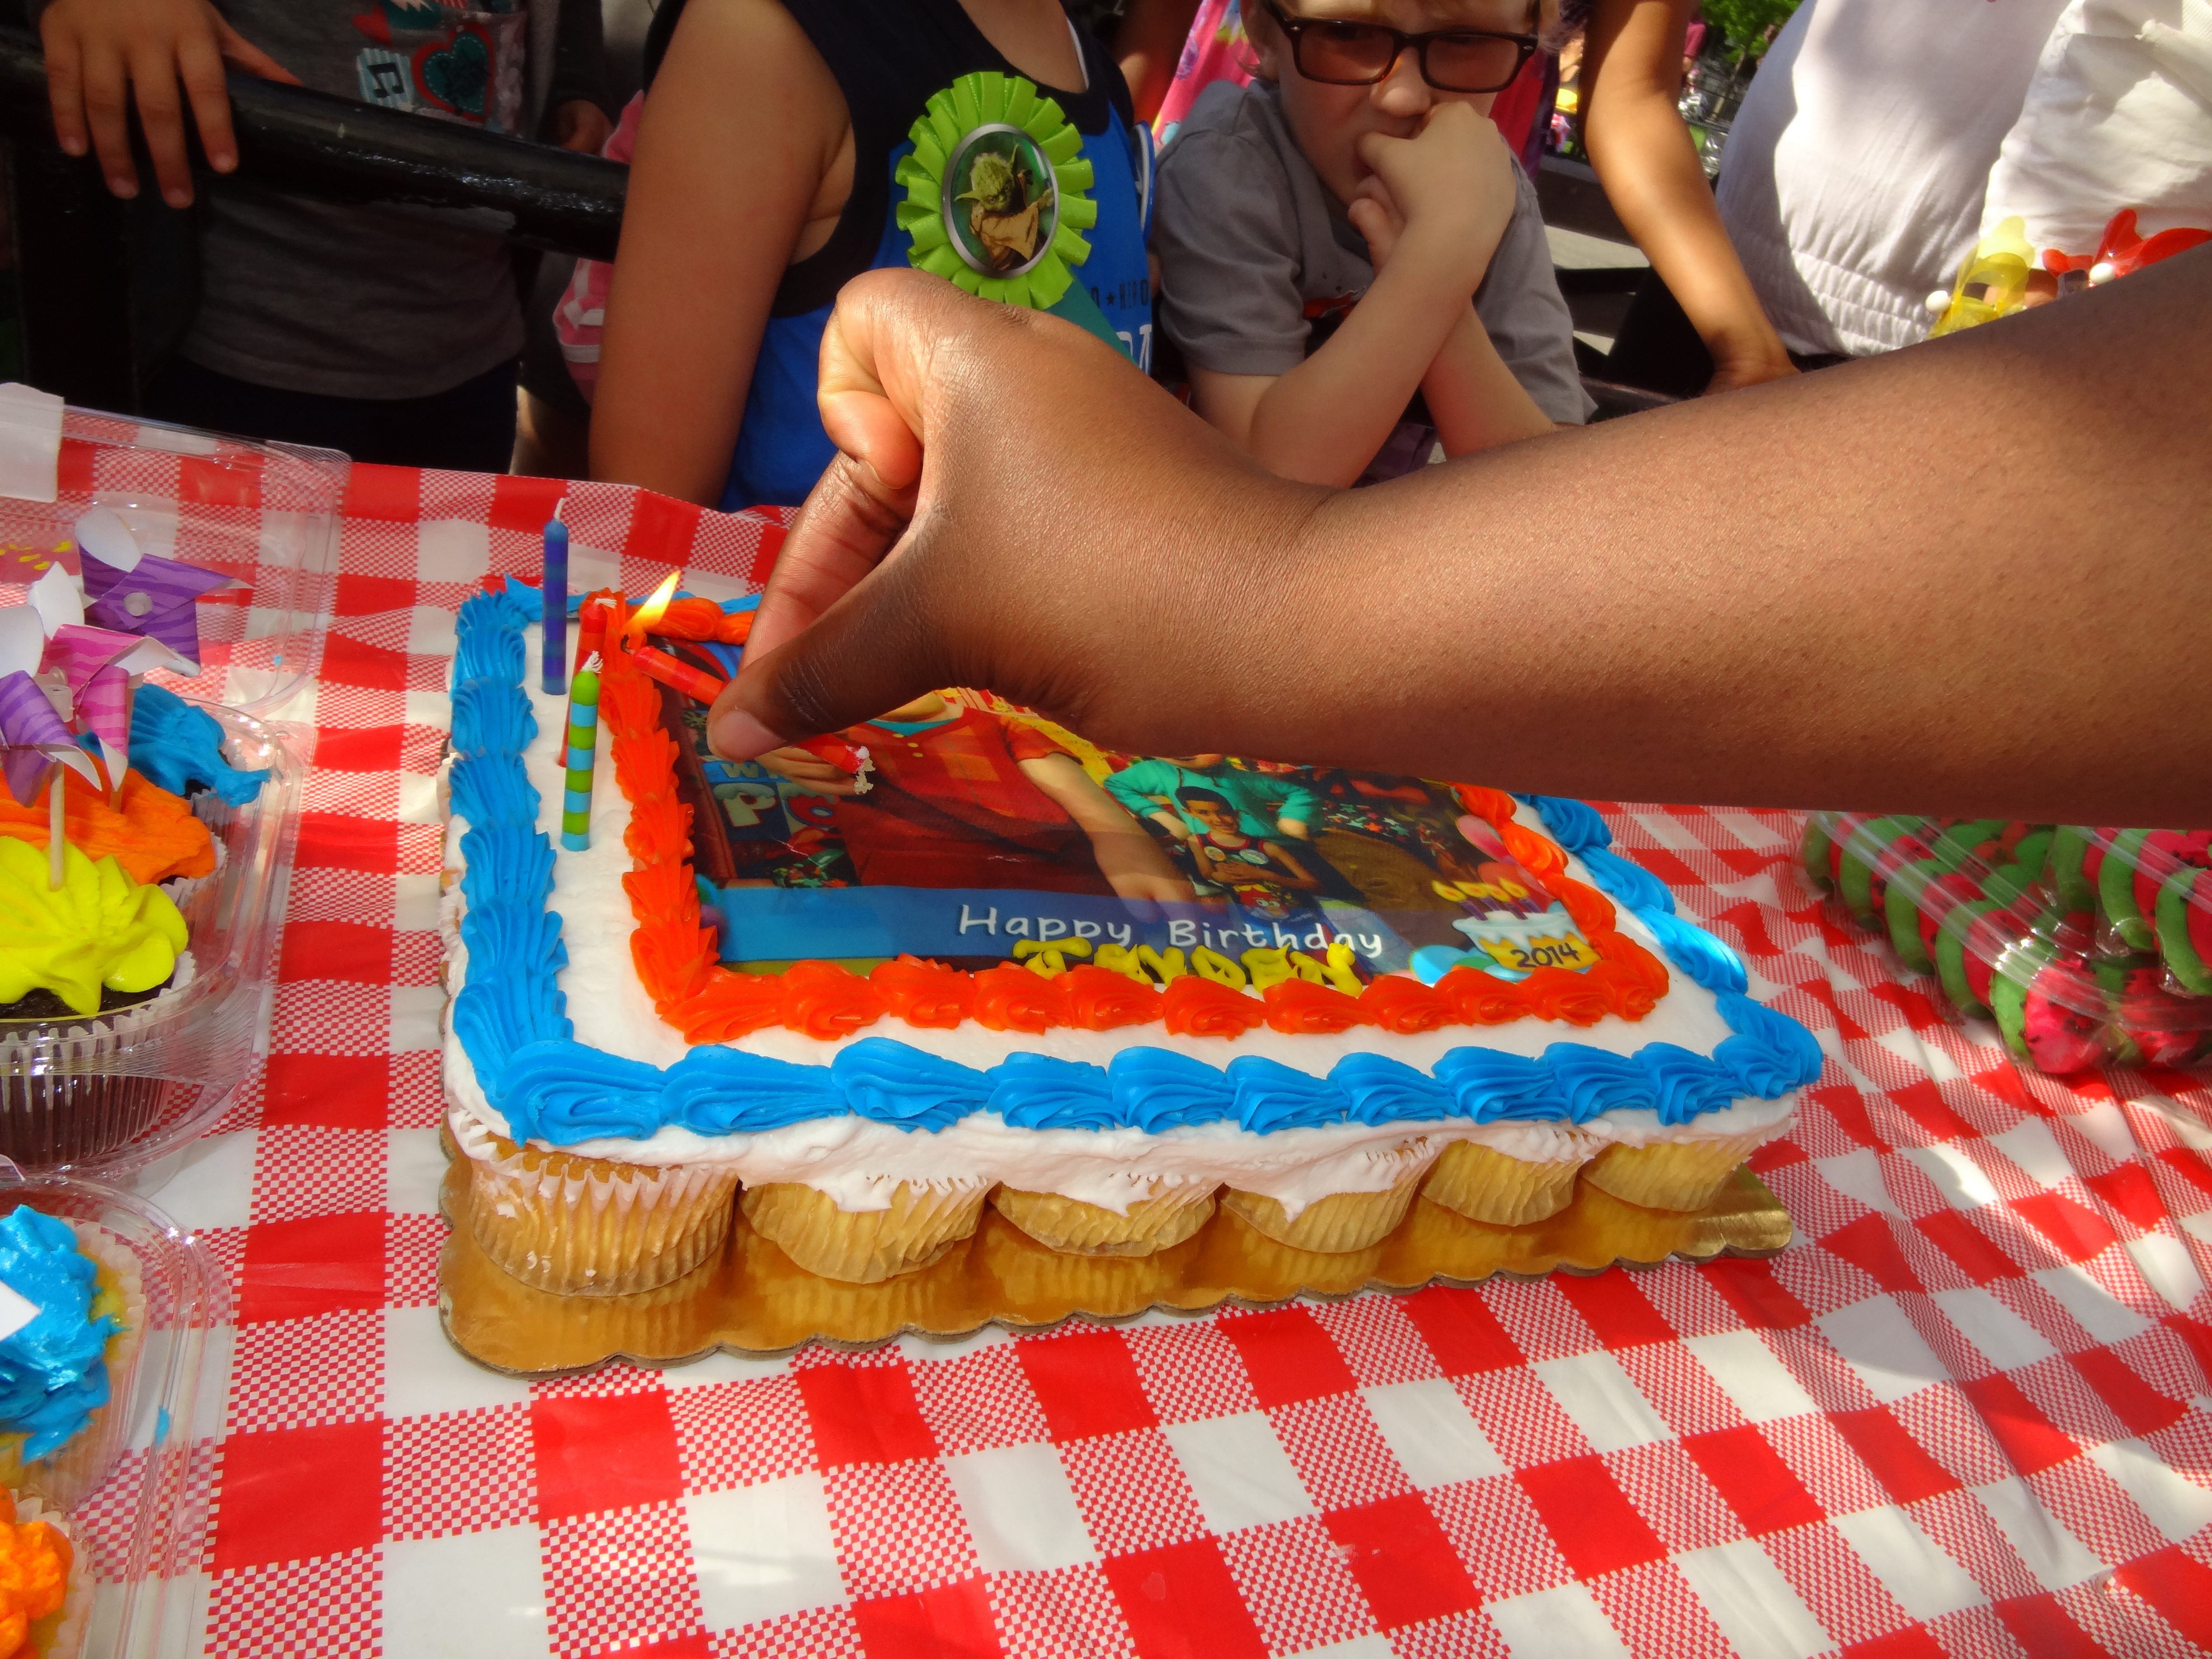 A Picnic Birthday Party makes a great summer celebration - Check out my 5 tips for planning the perfect summer birthday party - Click the link https://www.nyctechmommy.com/planning-the-perfect-summer-birthday-party/